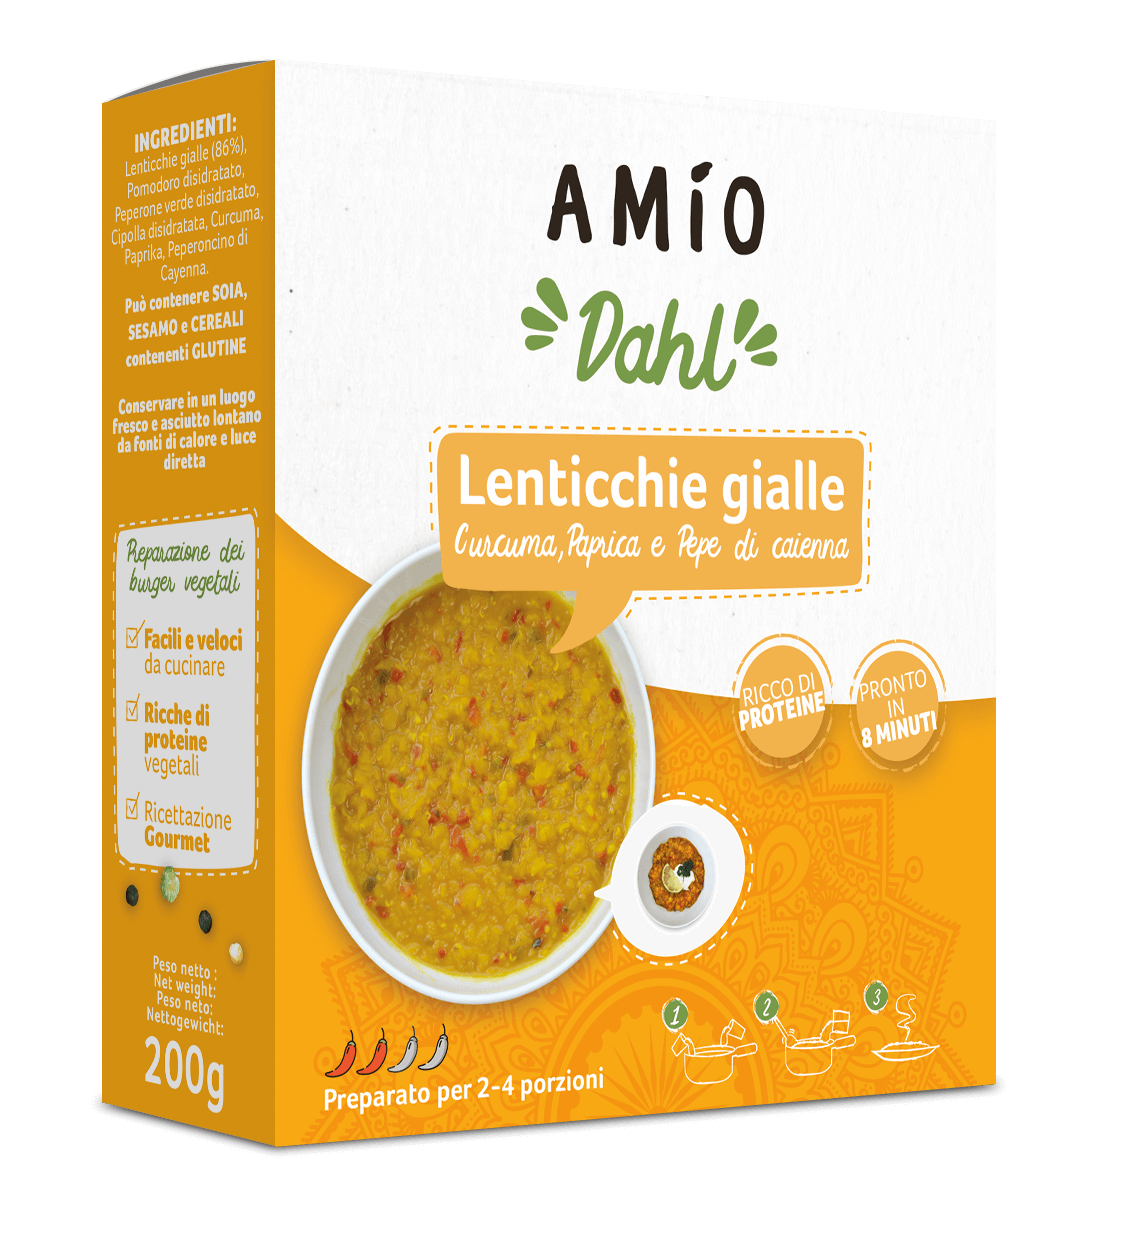 Product lenticchie gialle